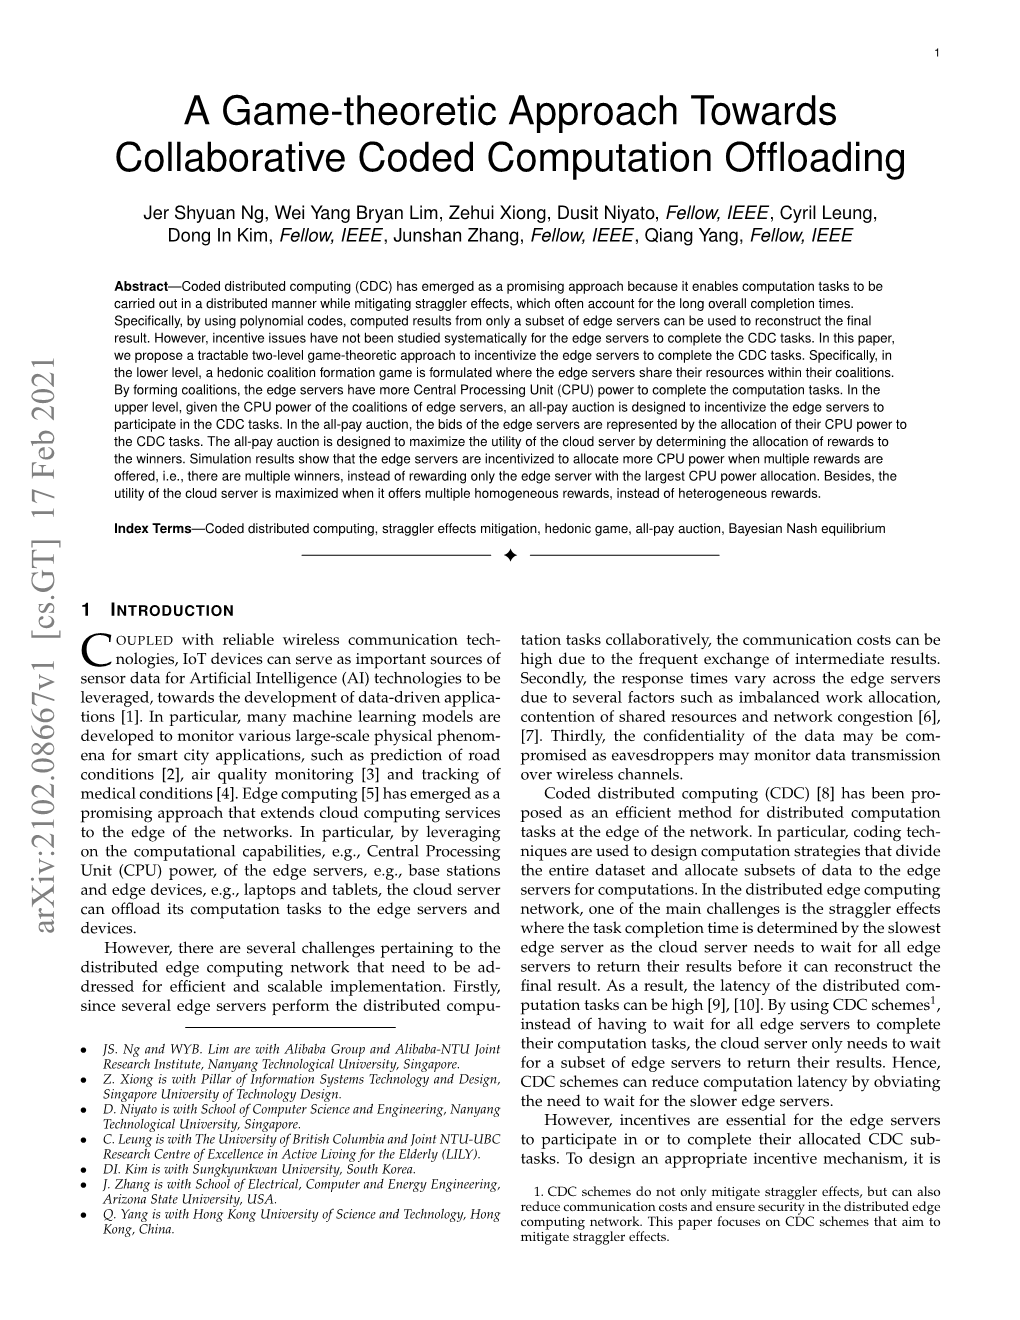 A Game-Theoretic Approach Towards Collaborative Coded Computation Ofﬂoading